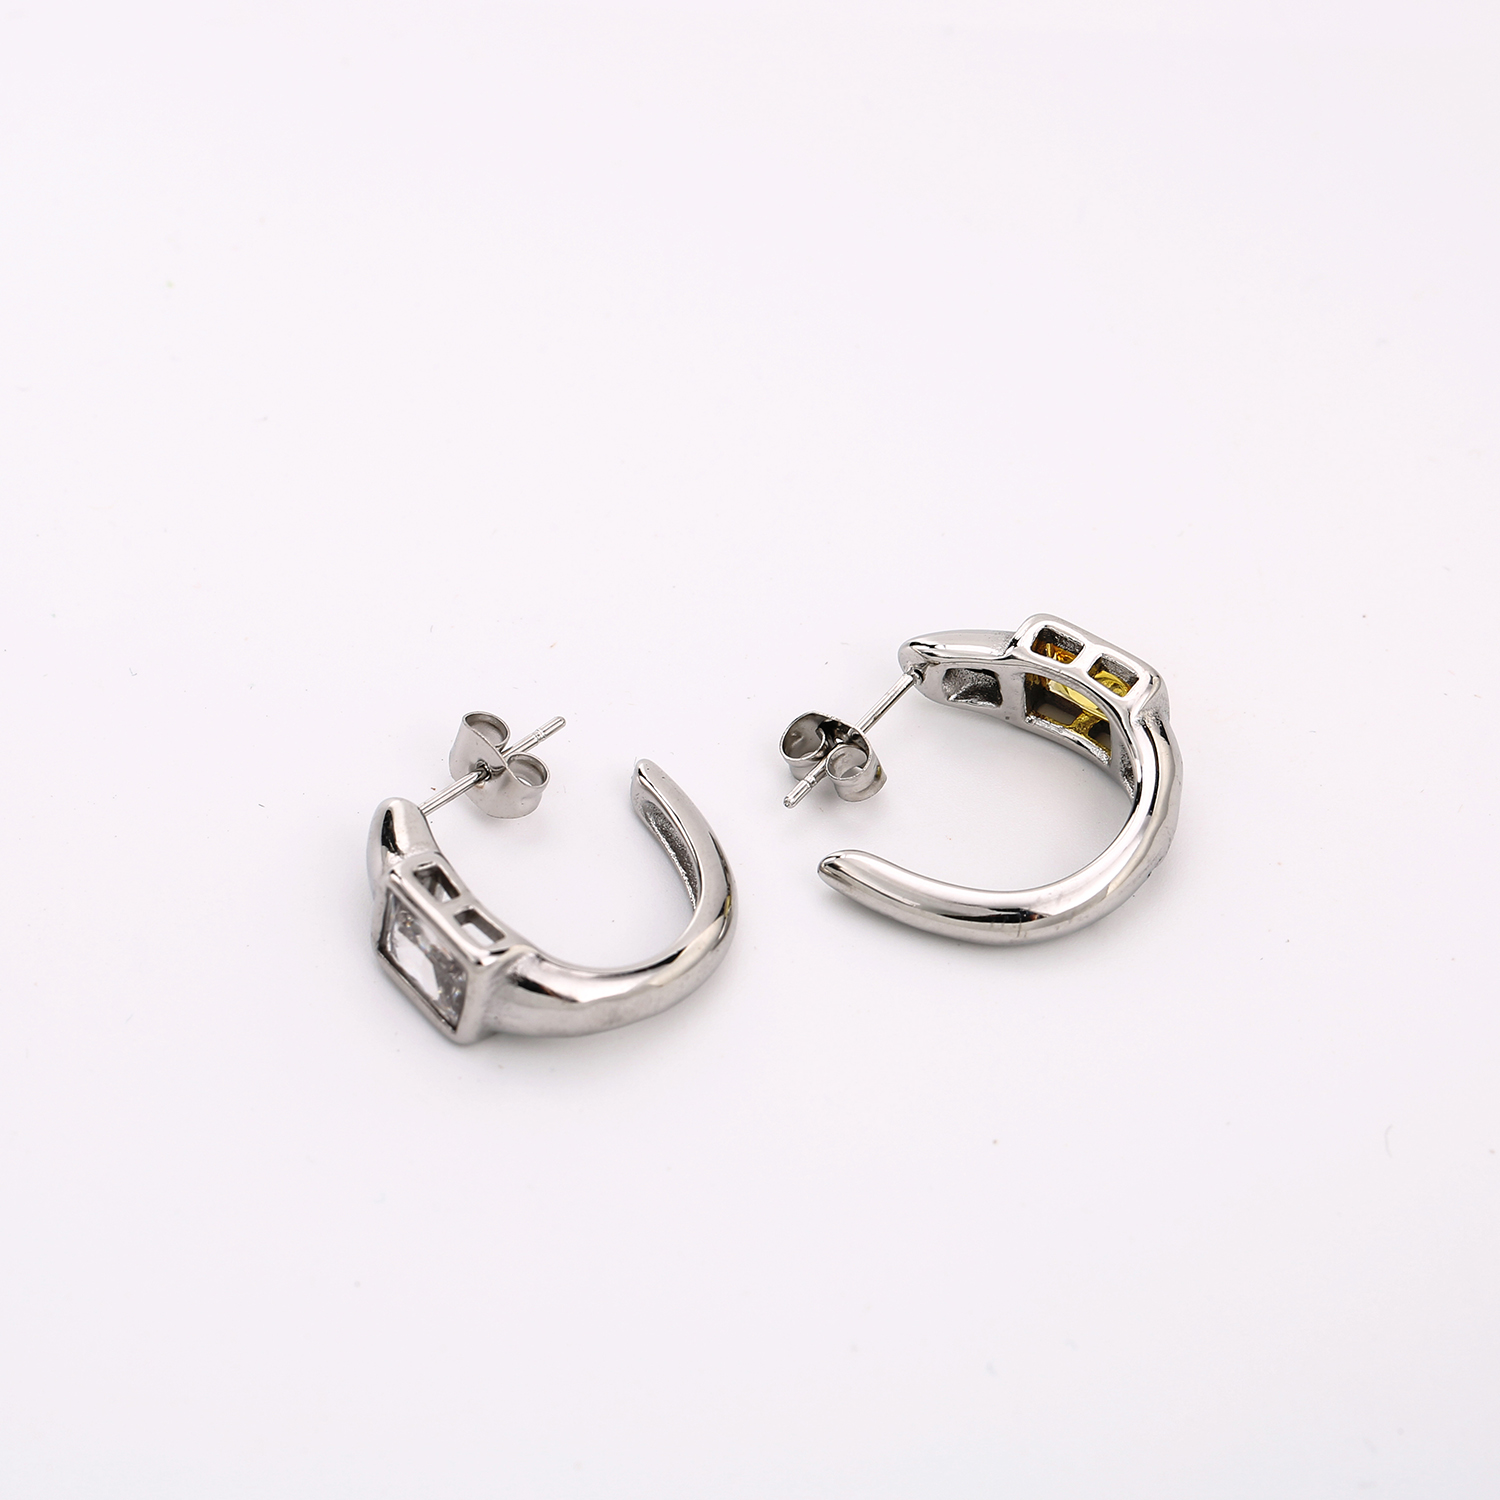 316L stainless steel earrings with diamond (3)4ak